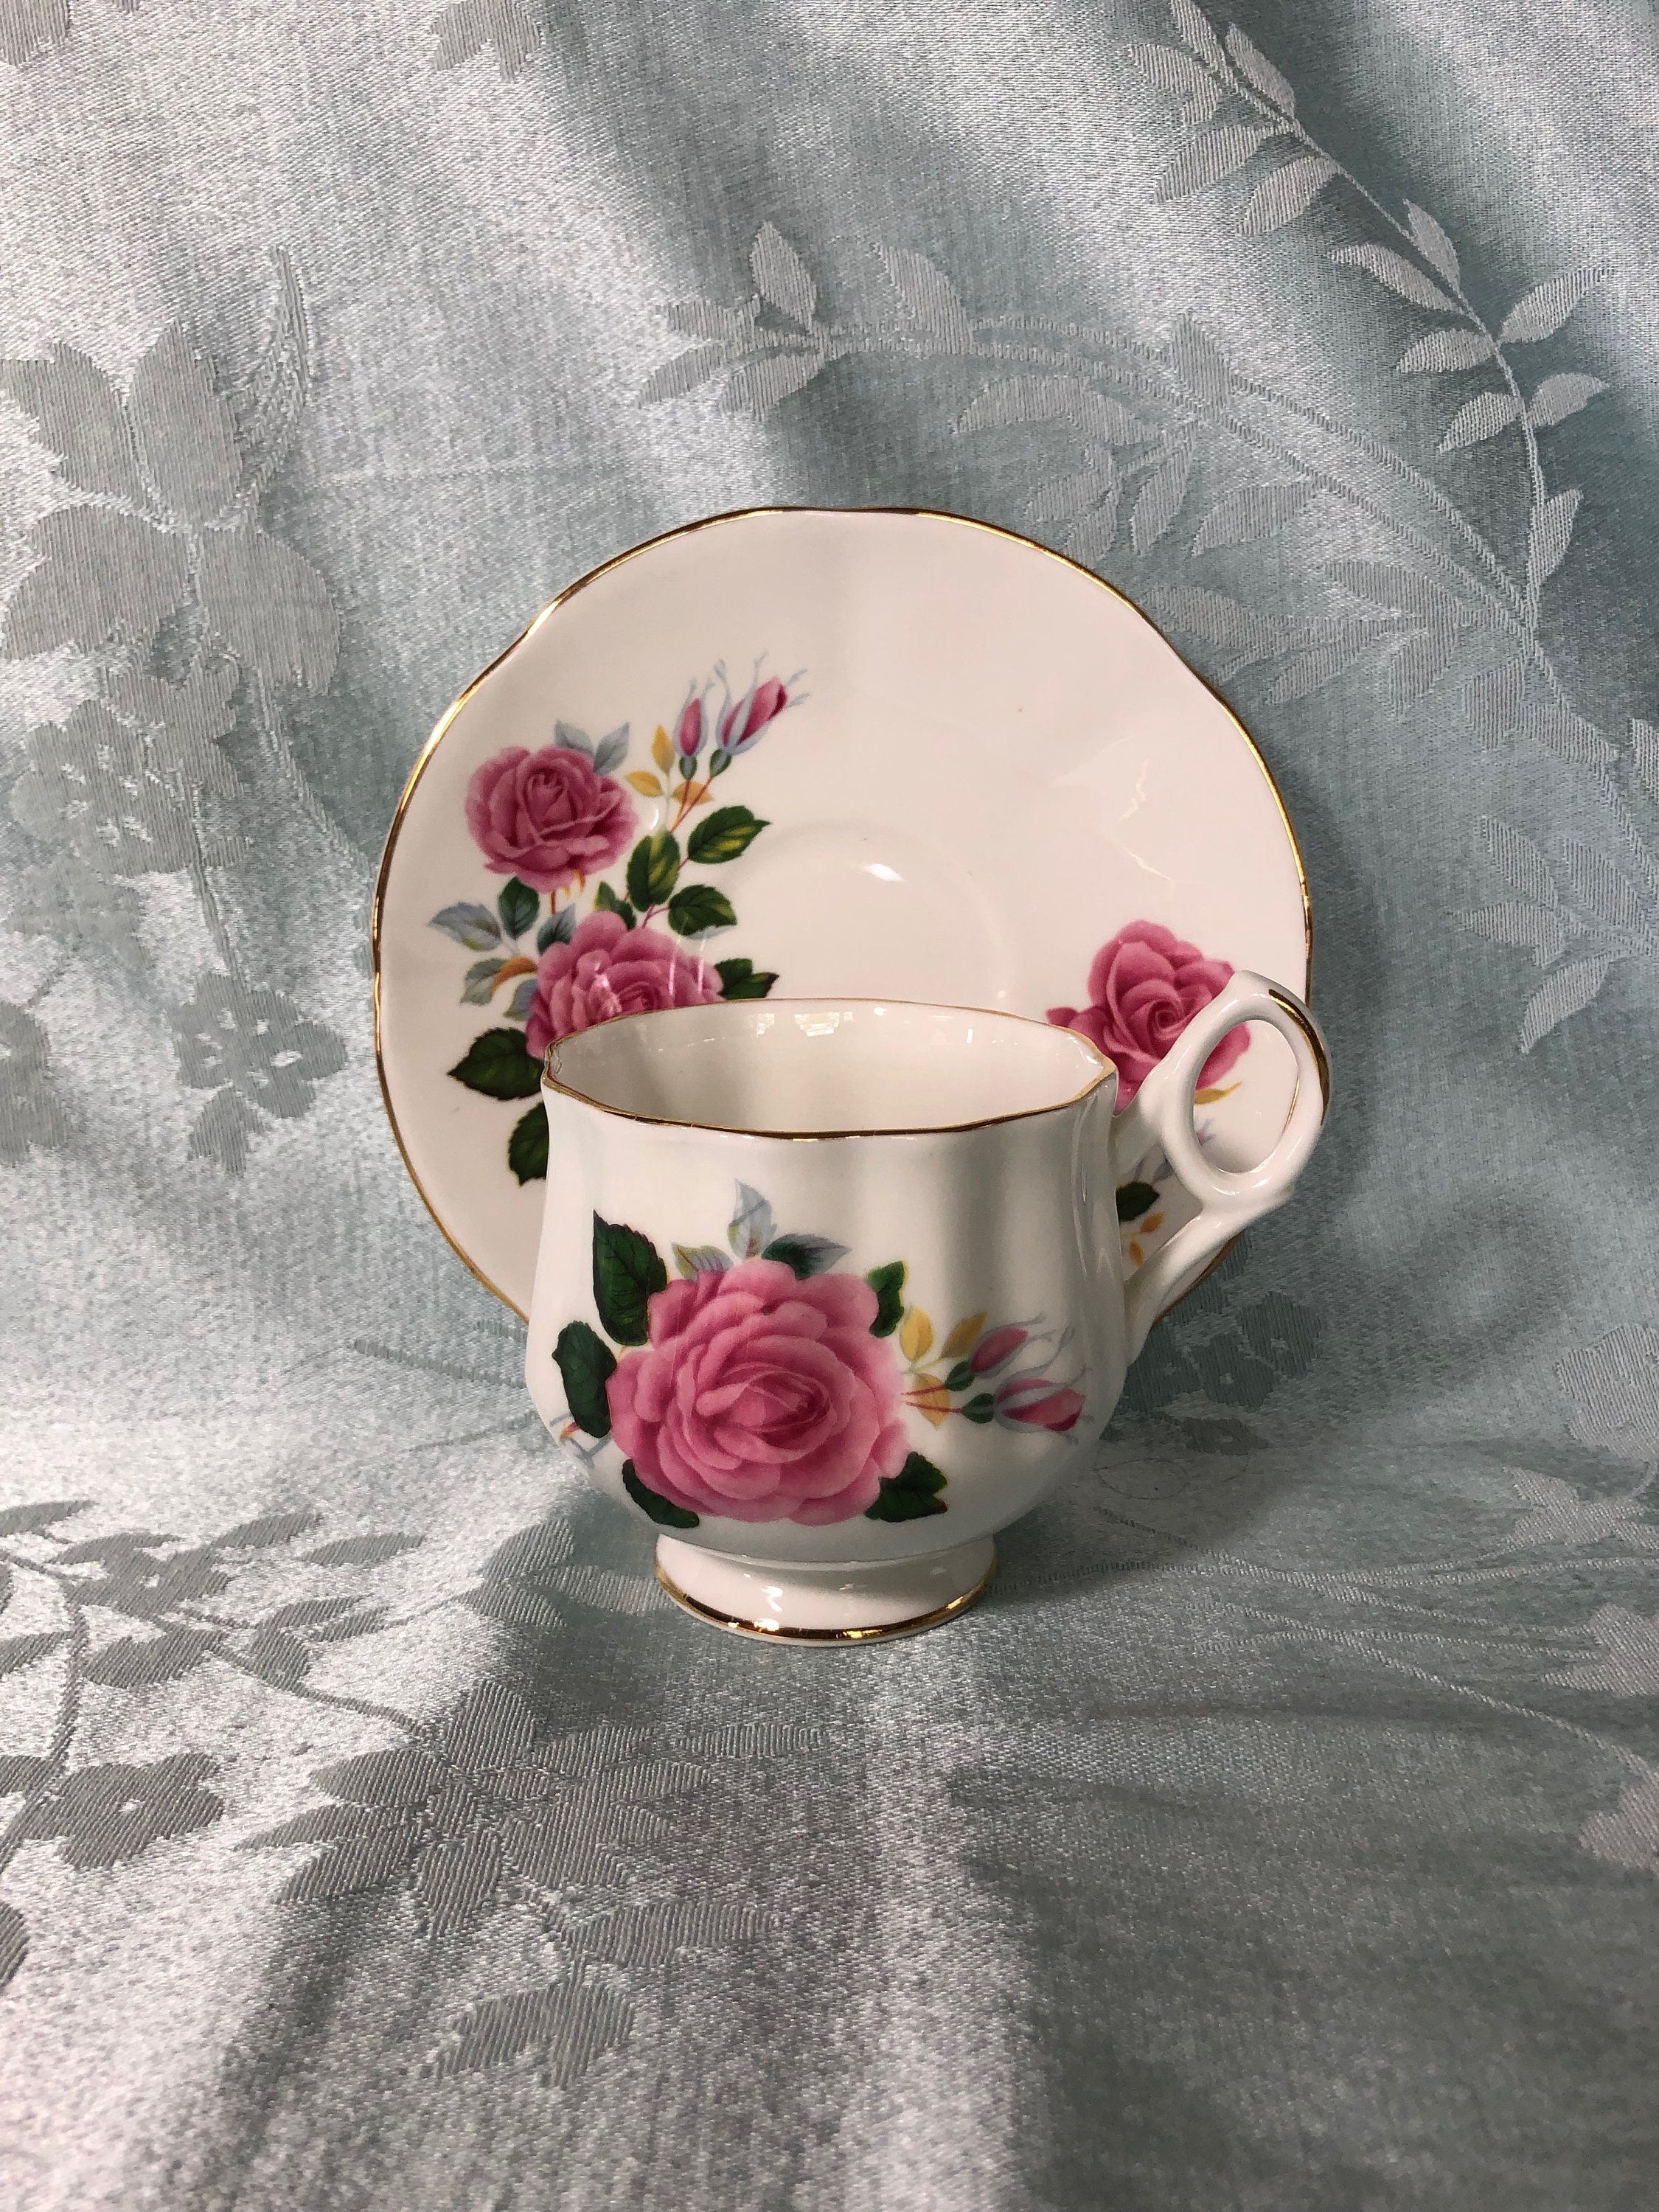 Vintage Footed Cup & Saucer Set Gold Trim Chic Floral Tea Party Made in England Royal Dover RDO1 Bone China Rose Pattern